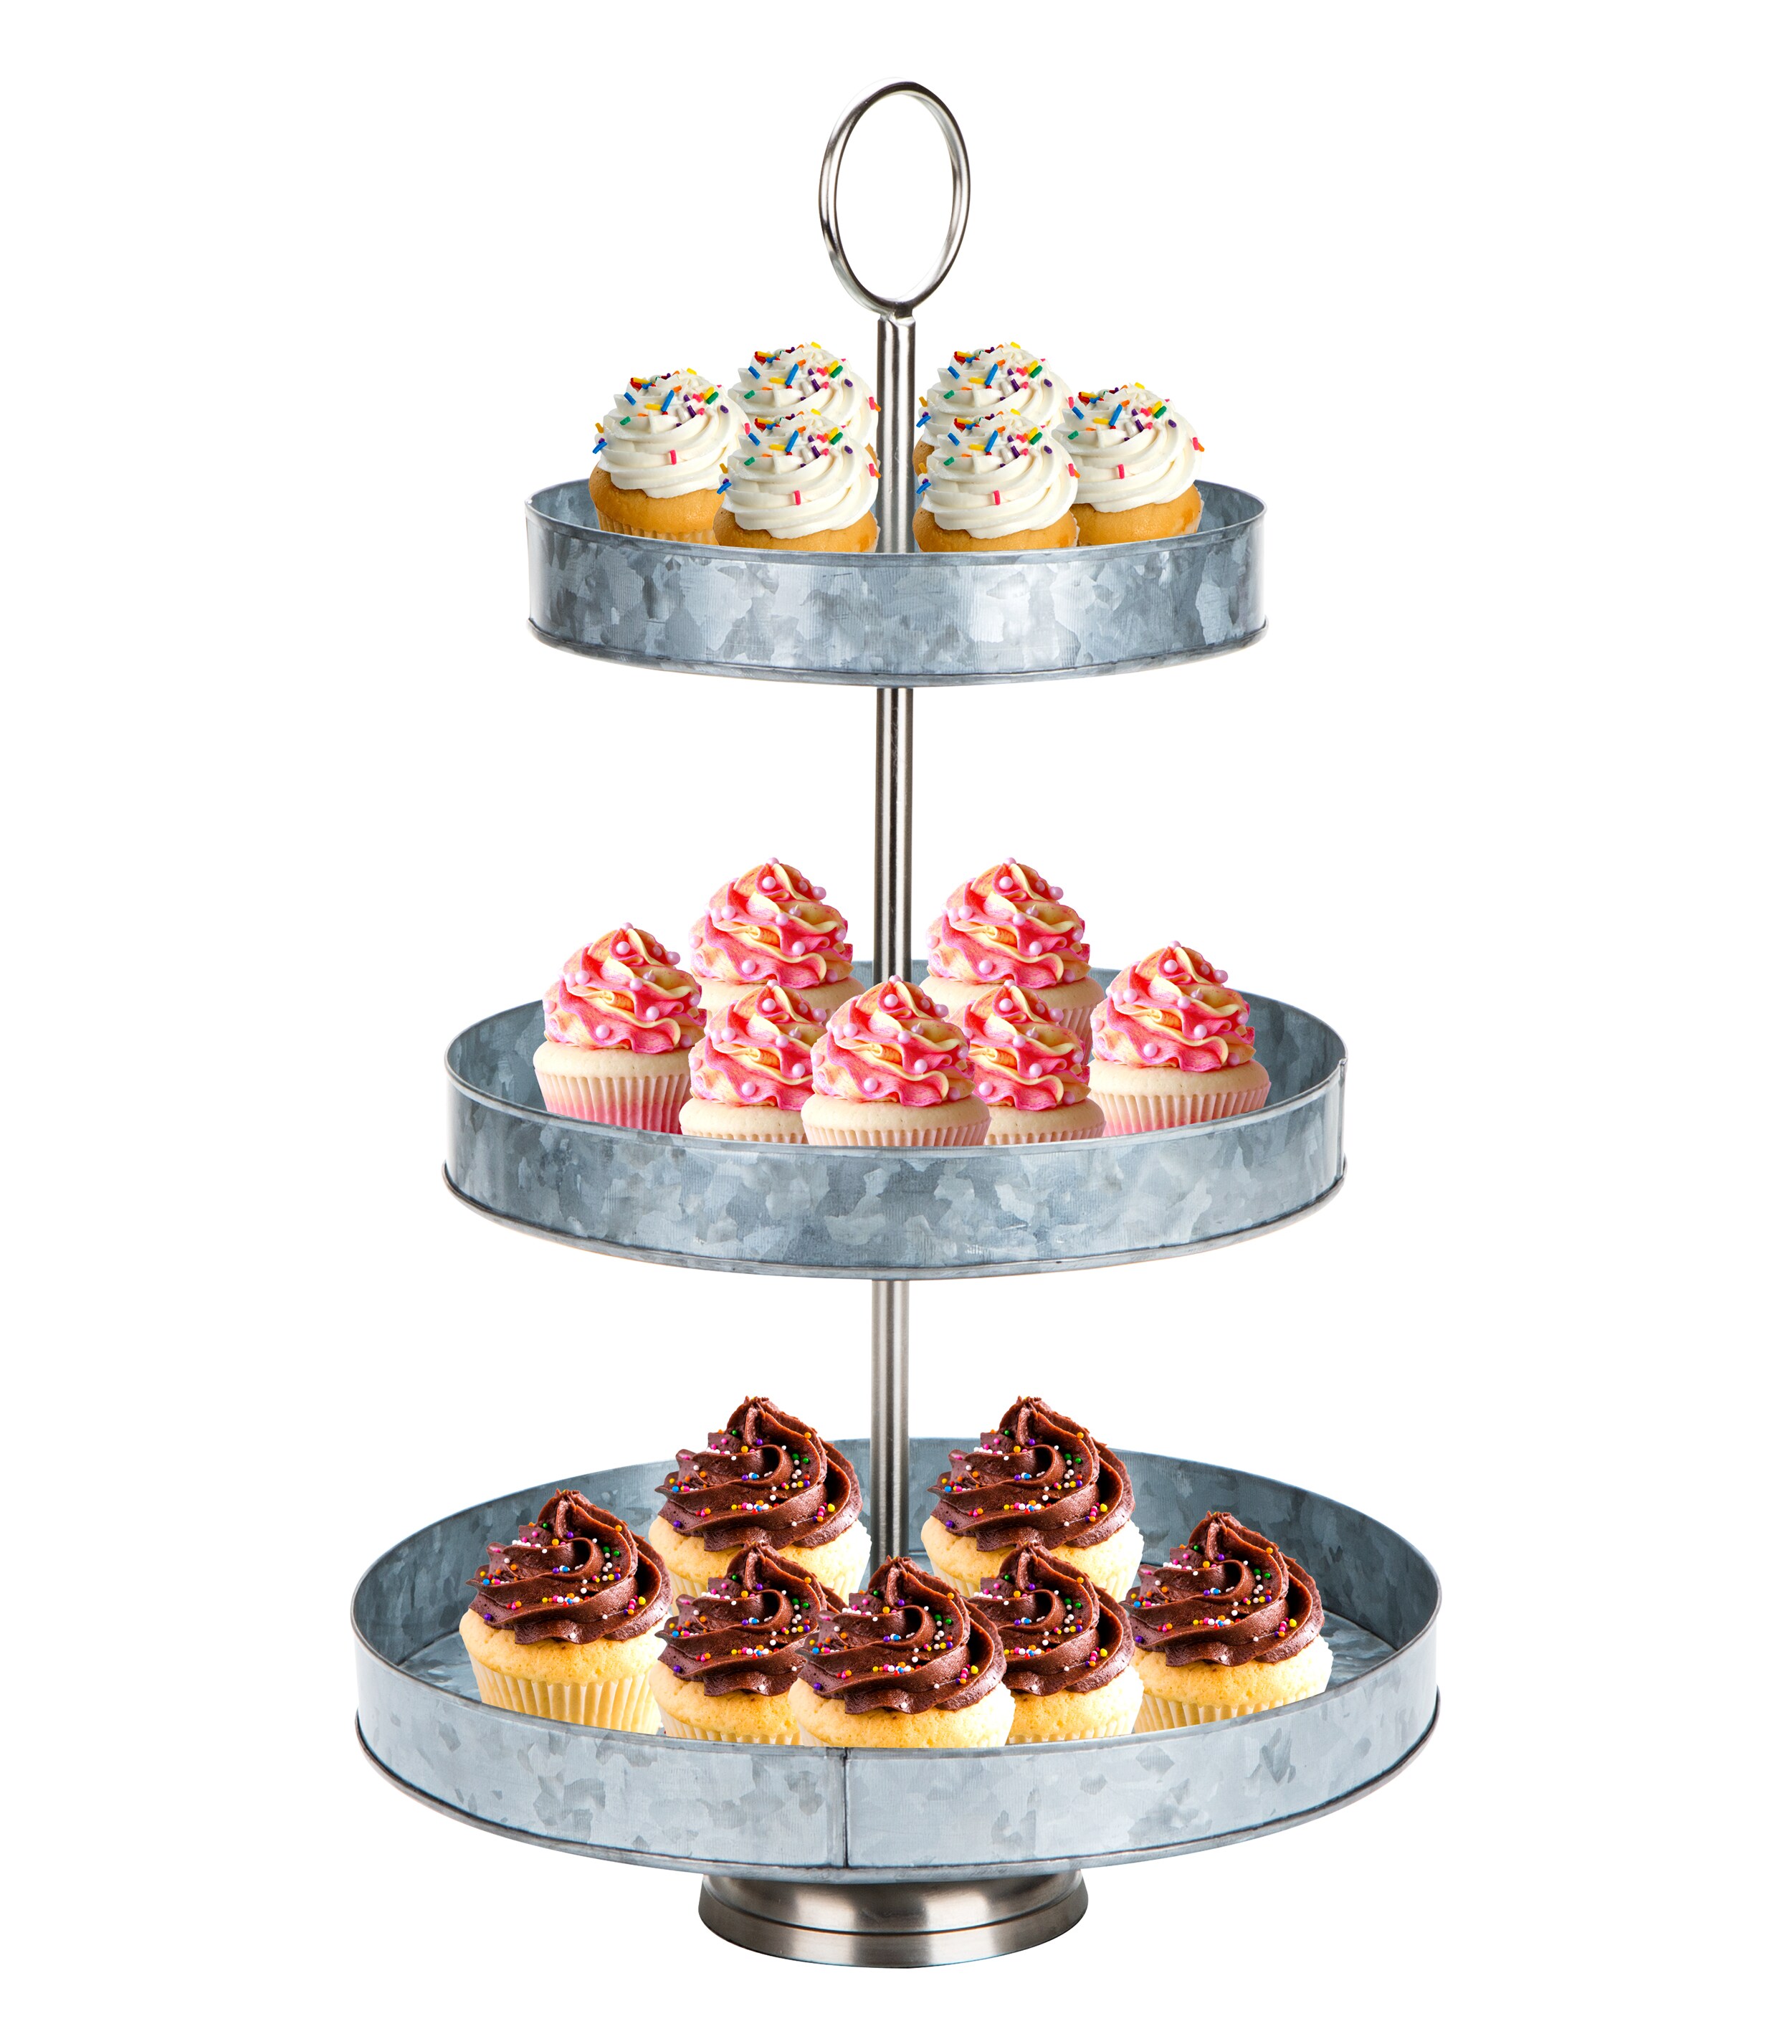 GORGEOUS 4 Tier Cupcake Stand Holder Tower Display Tree Acrylic Cake Carrier US 